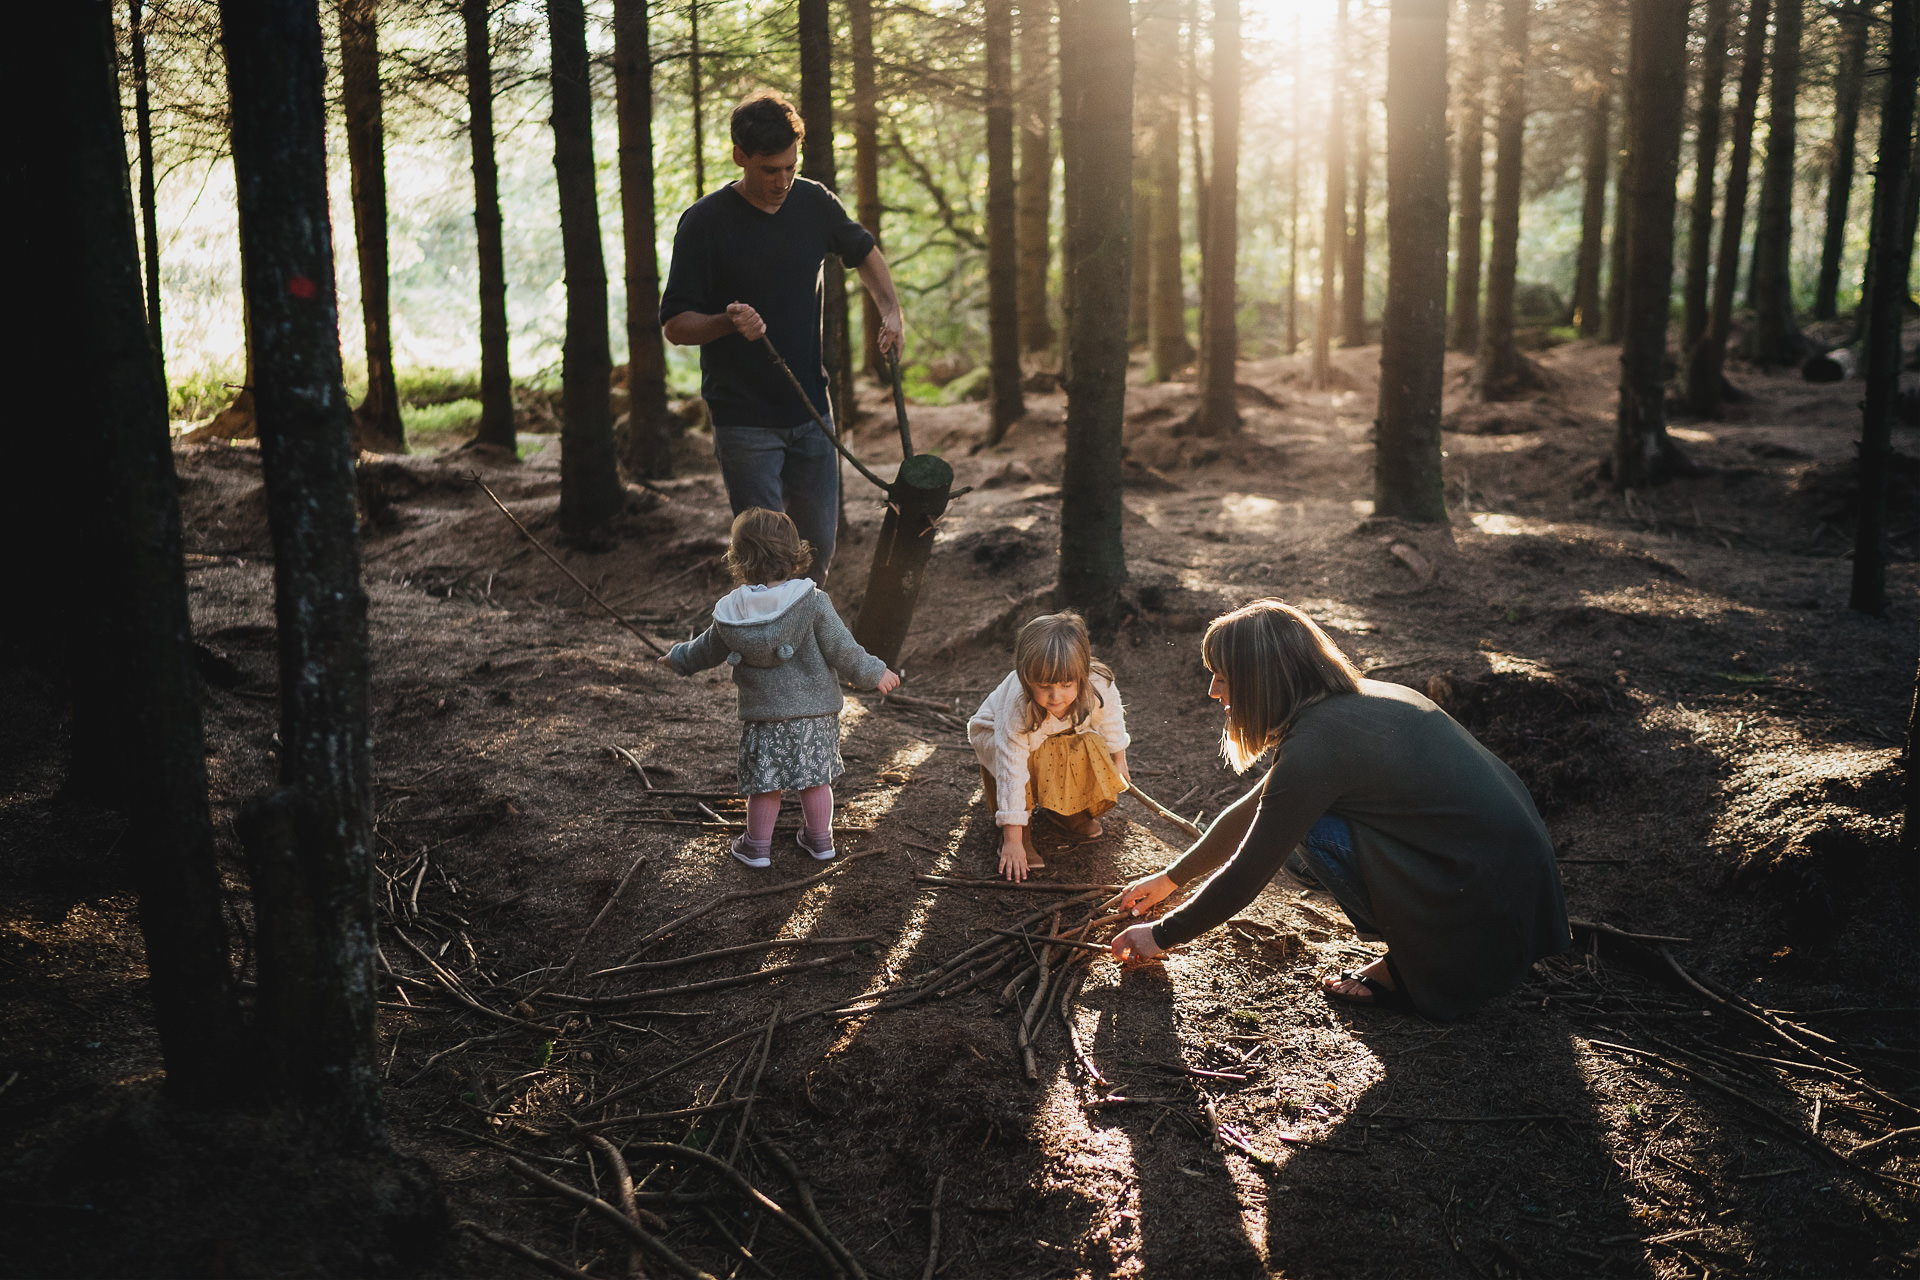 A family in the woods in evening light, gathering sticks